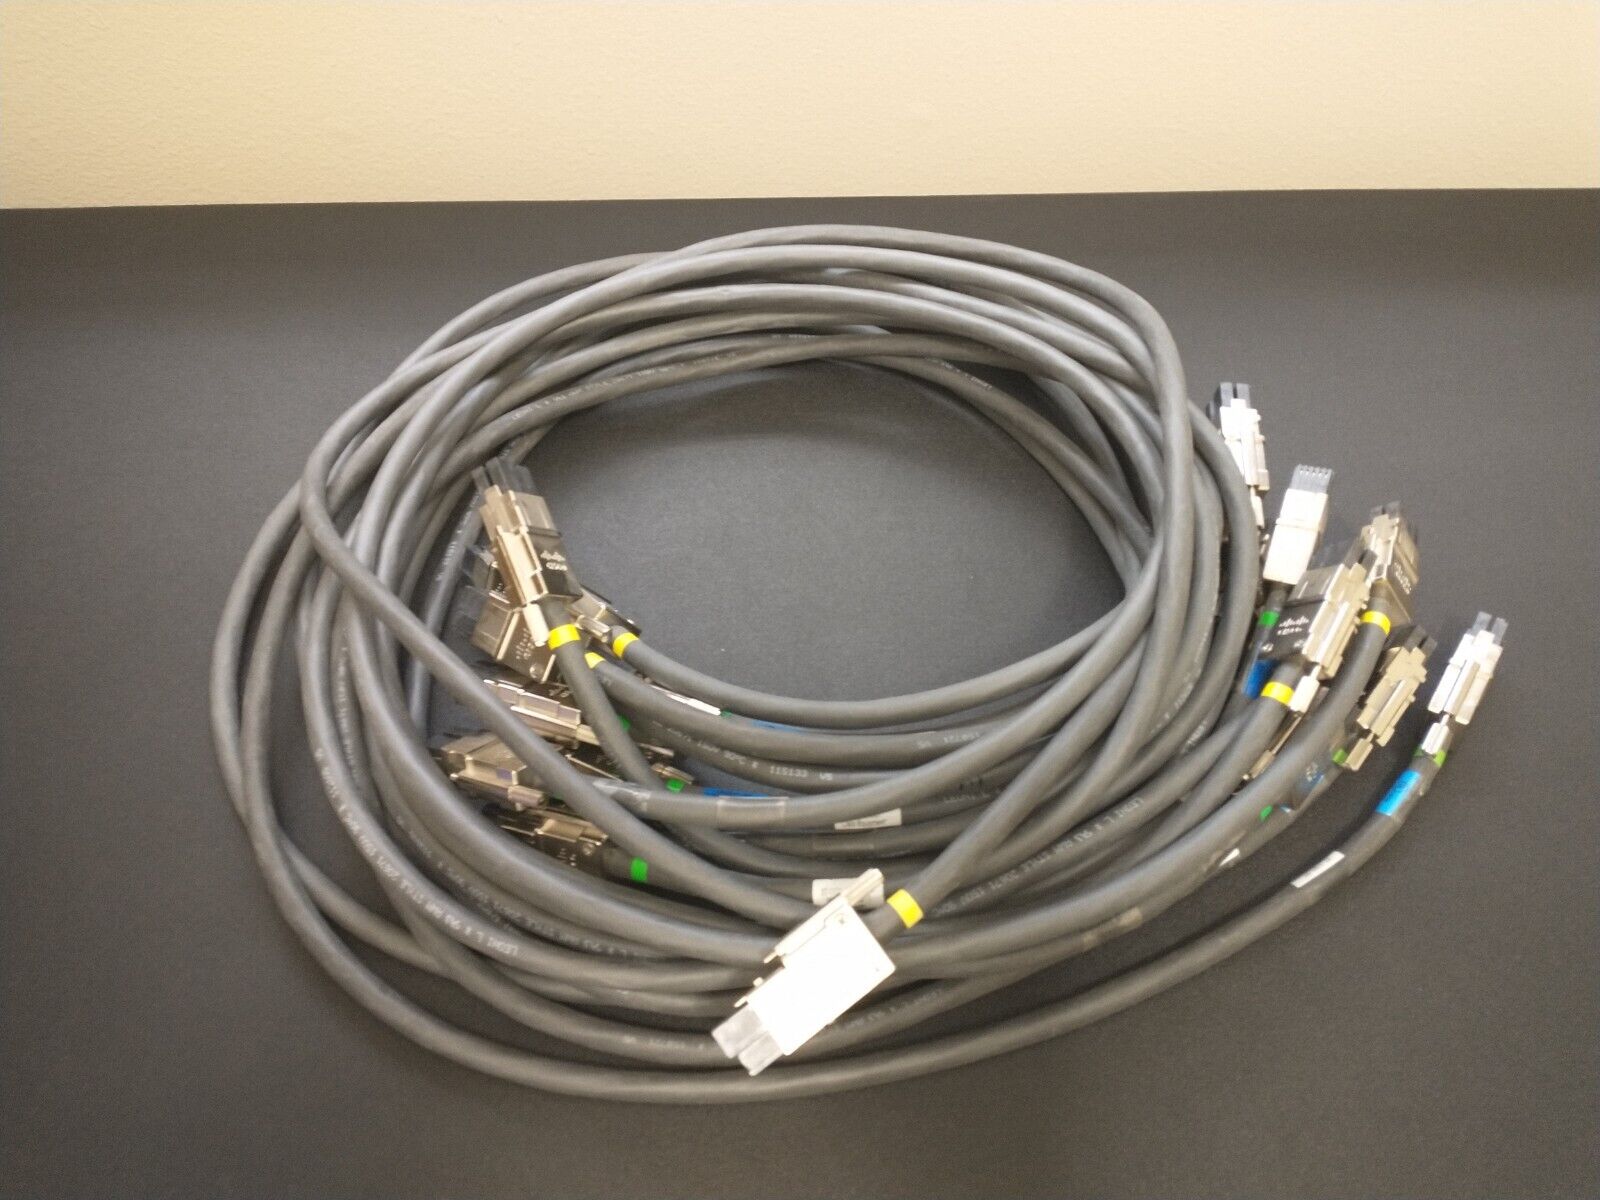 Lot of 13: Cisco CAB-SPWR-150CM Stack Power Cable 37-1121-01 StackPower